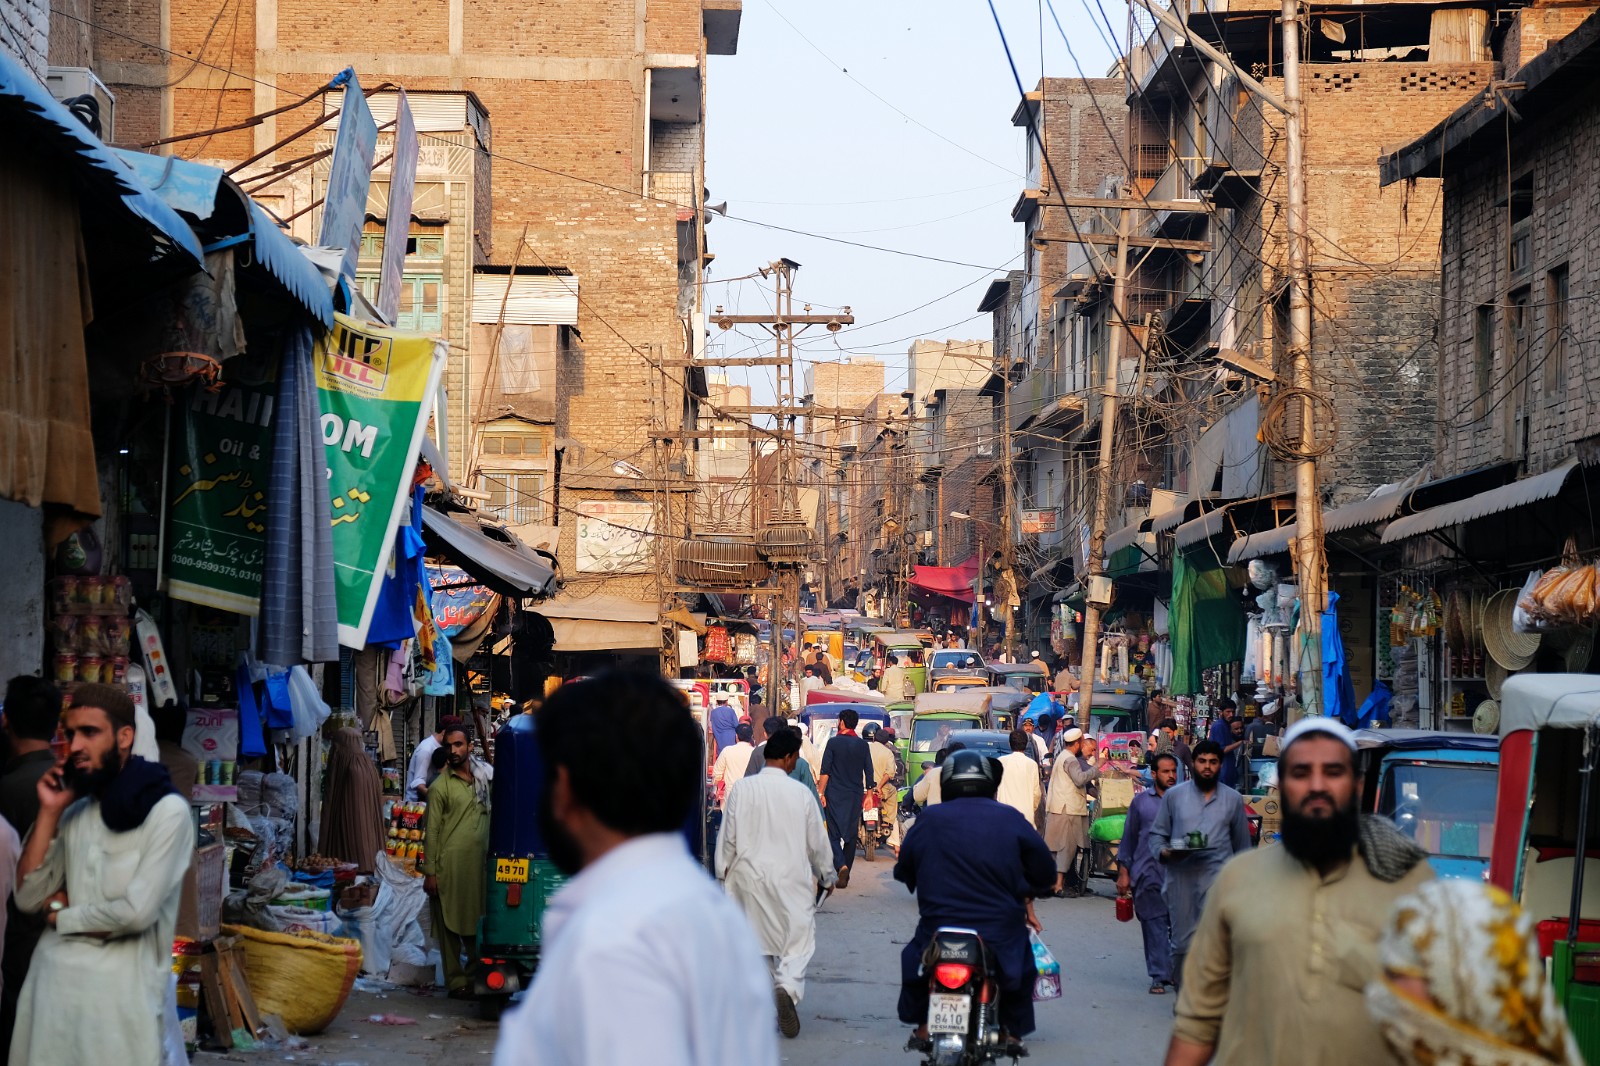 The commercial market in the center of Bashawar, Pakistan. /CFP